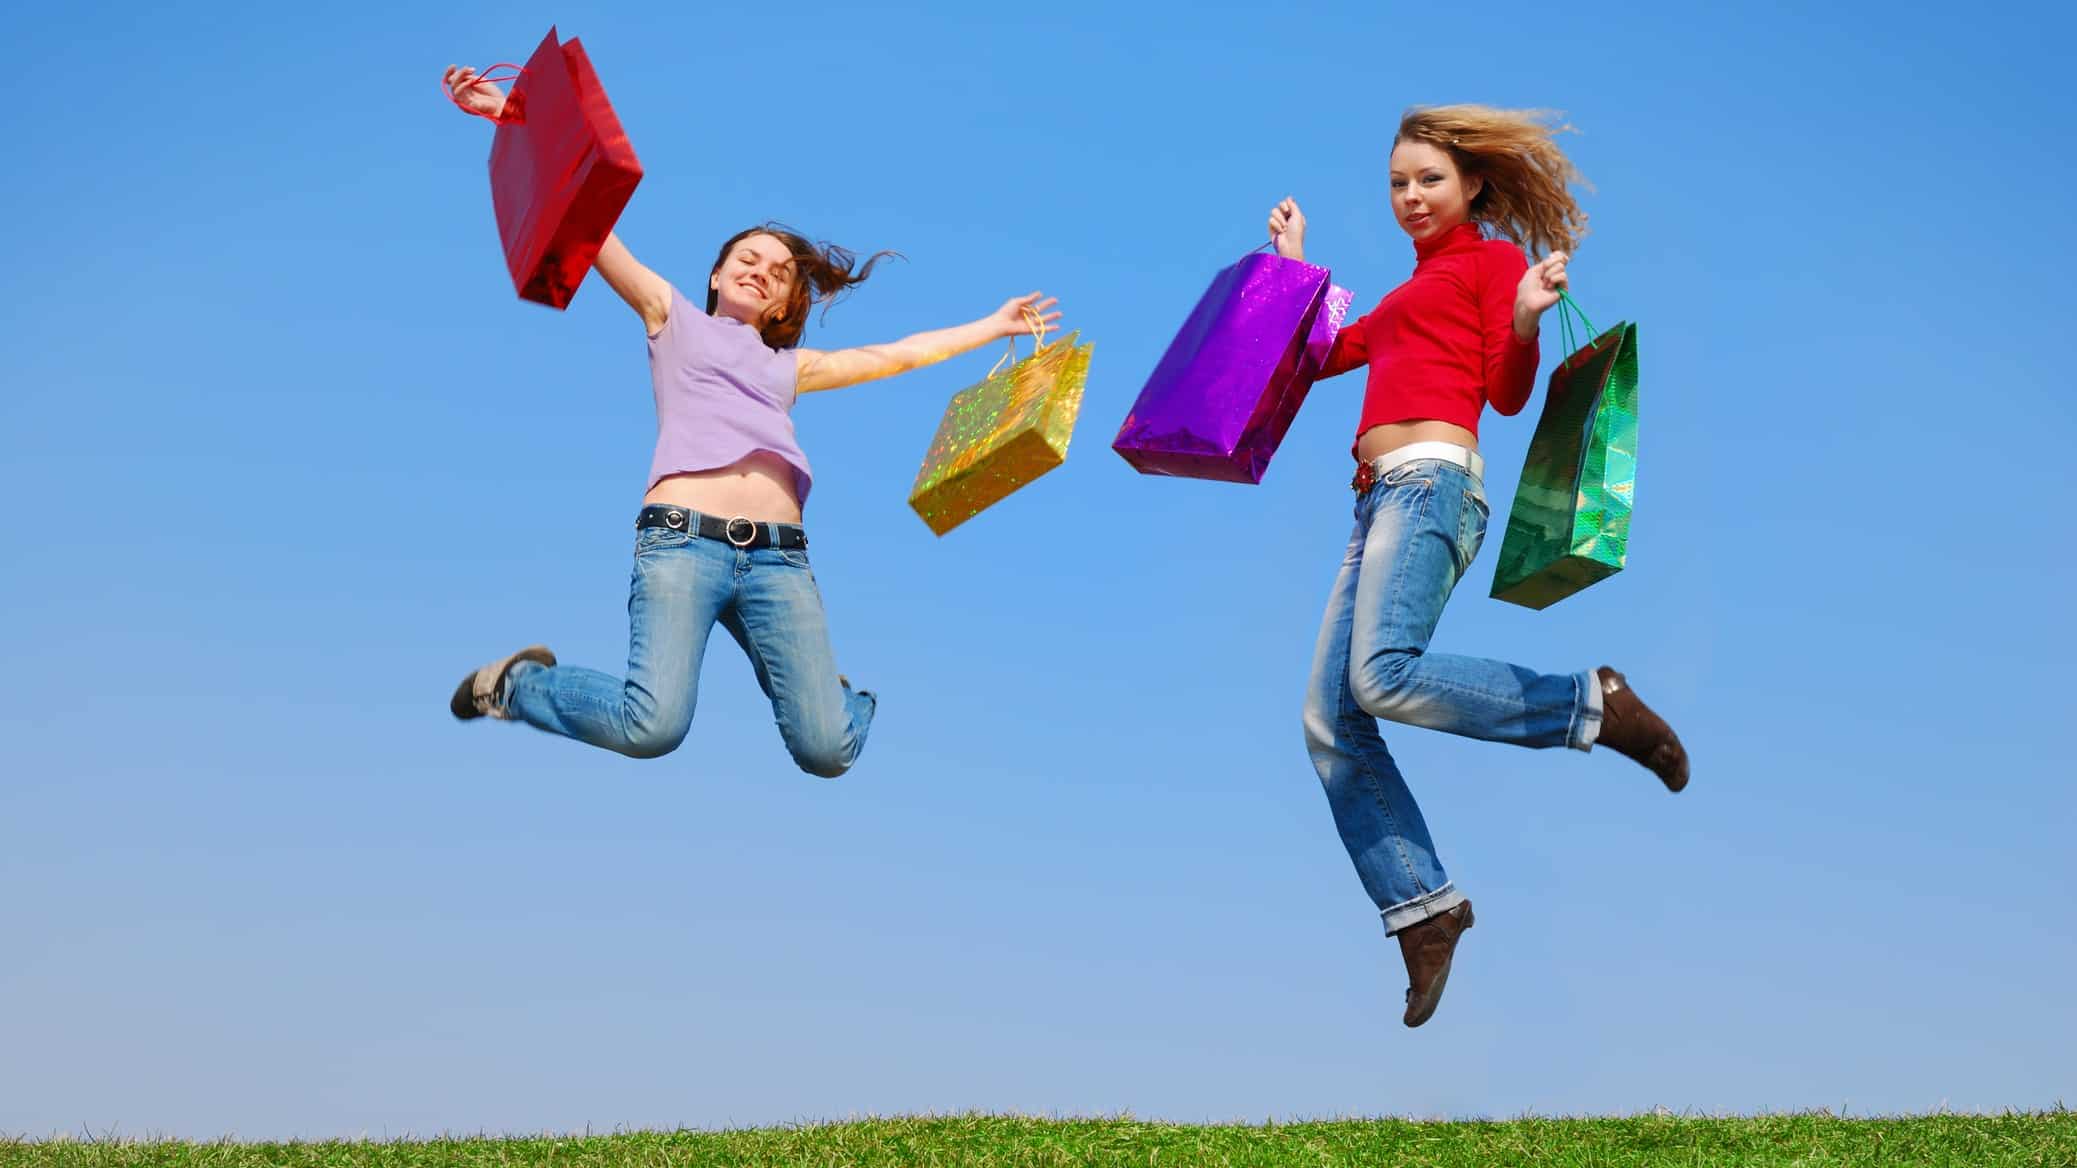 Two women with shopping bags leap on the grass in front of a blue sky.